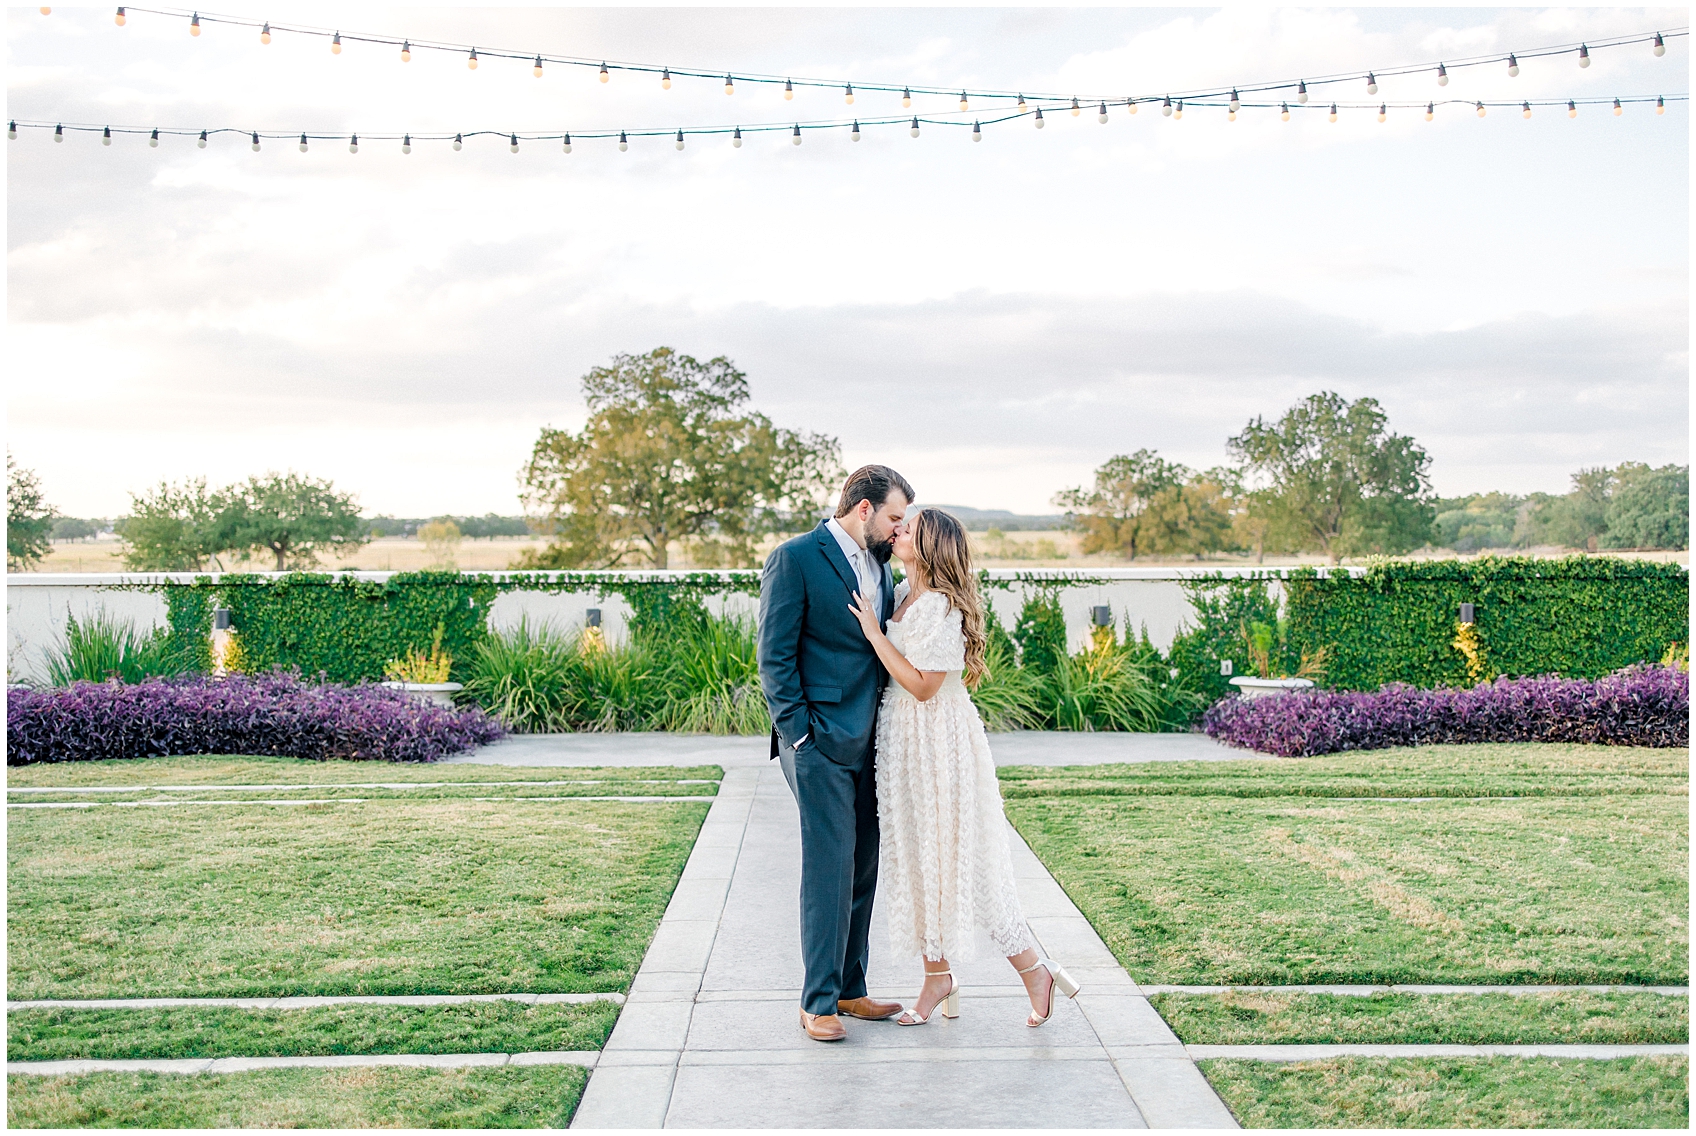 locations for elopements and micro intimate weddings in the texas hill country by allison jeffers photography 0004